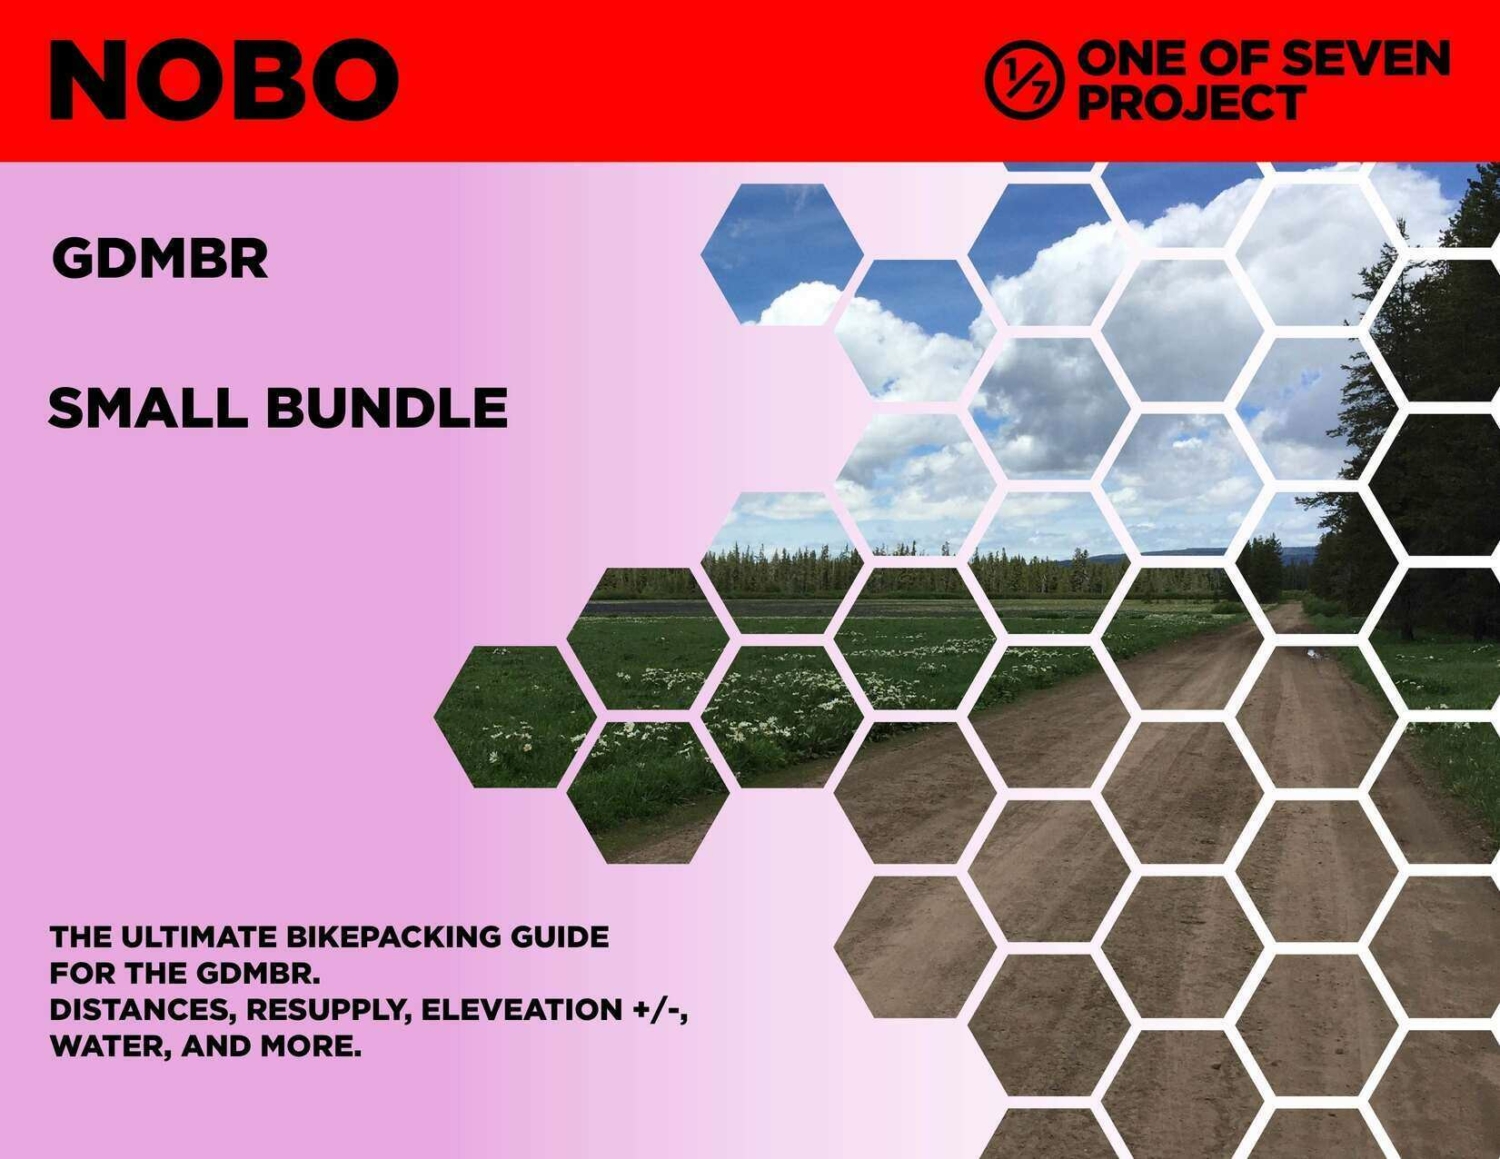 GDMBR NOBO Small Bundle, planning aid, guide, bikepacking